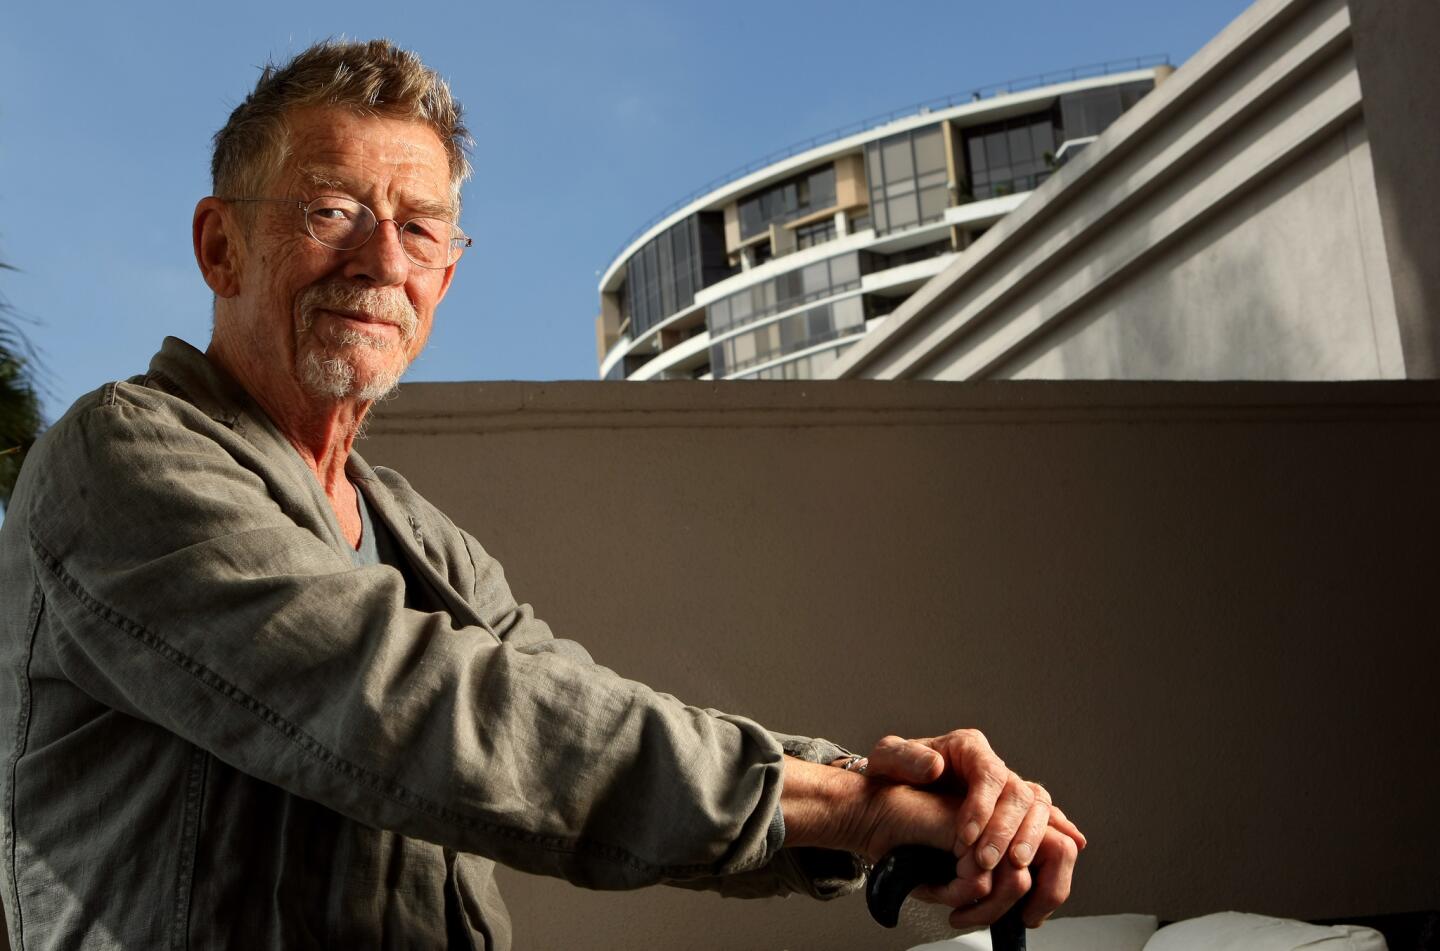 Actor John Hurt in 2012 at the Ritz-Carlton in Marina del Rey. He died Friday at age 77.